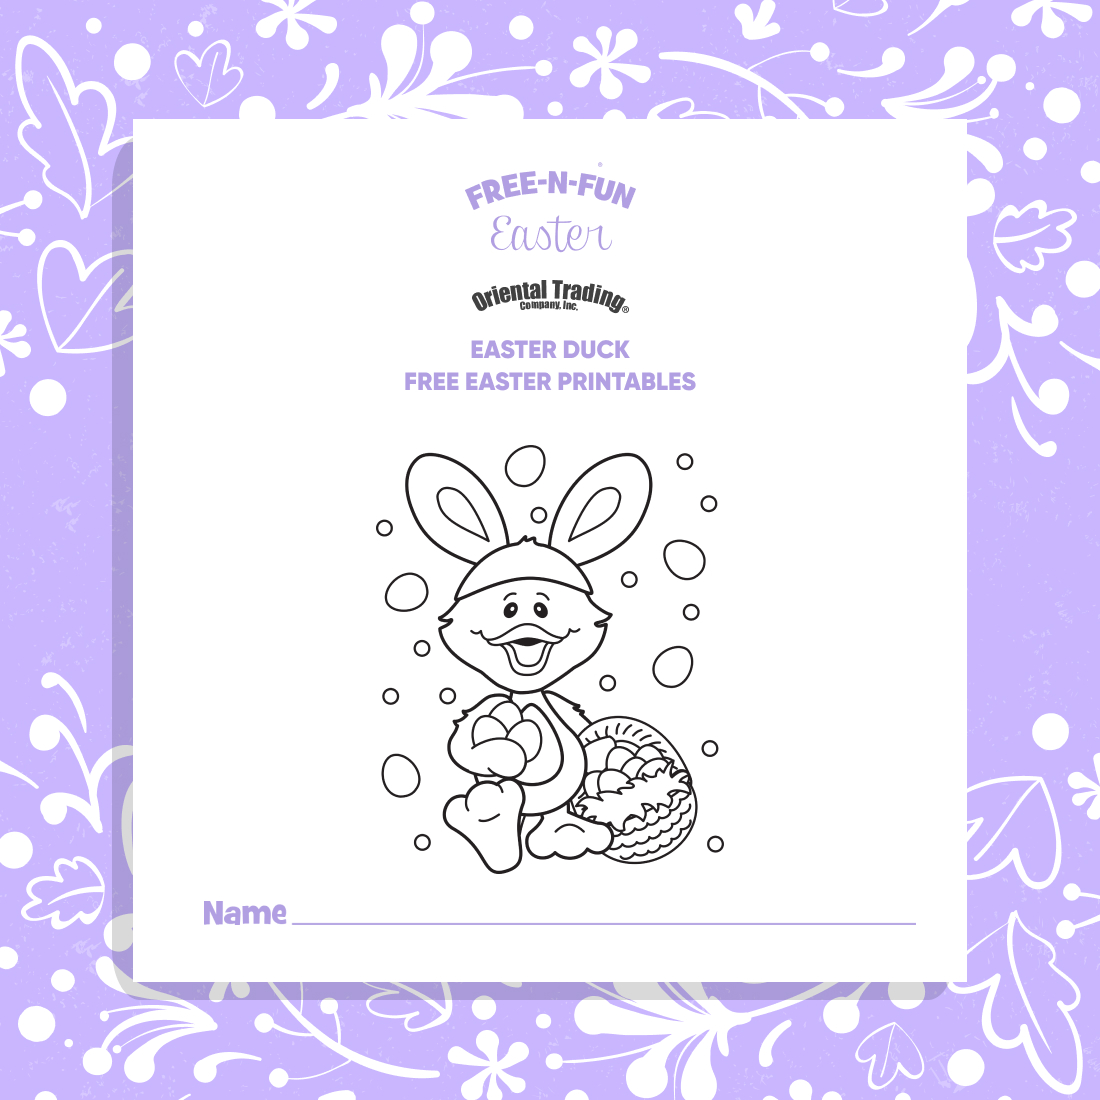 Easter Duck Free Easter Printable cover image.